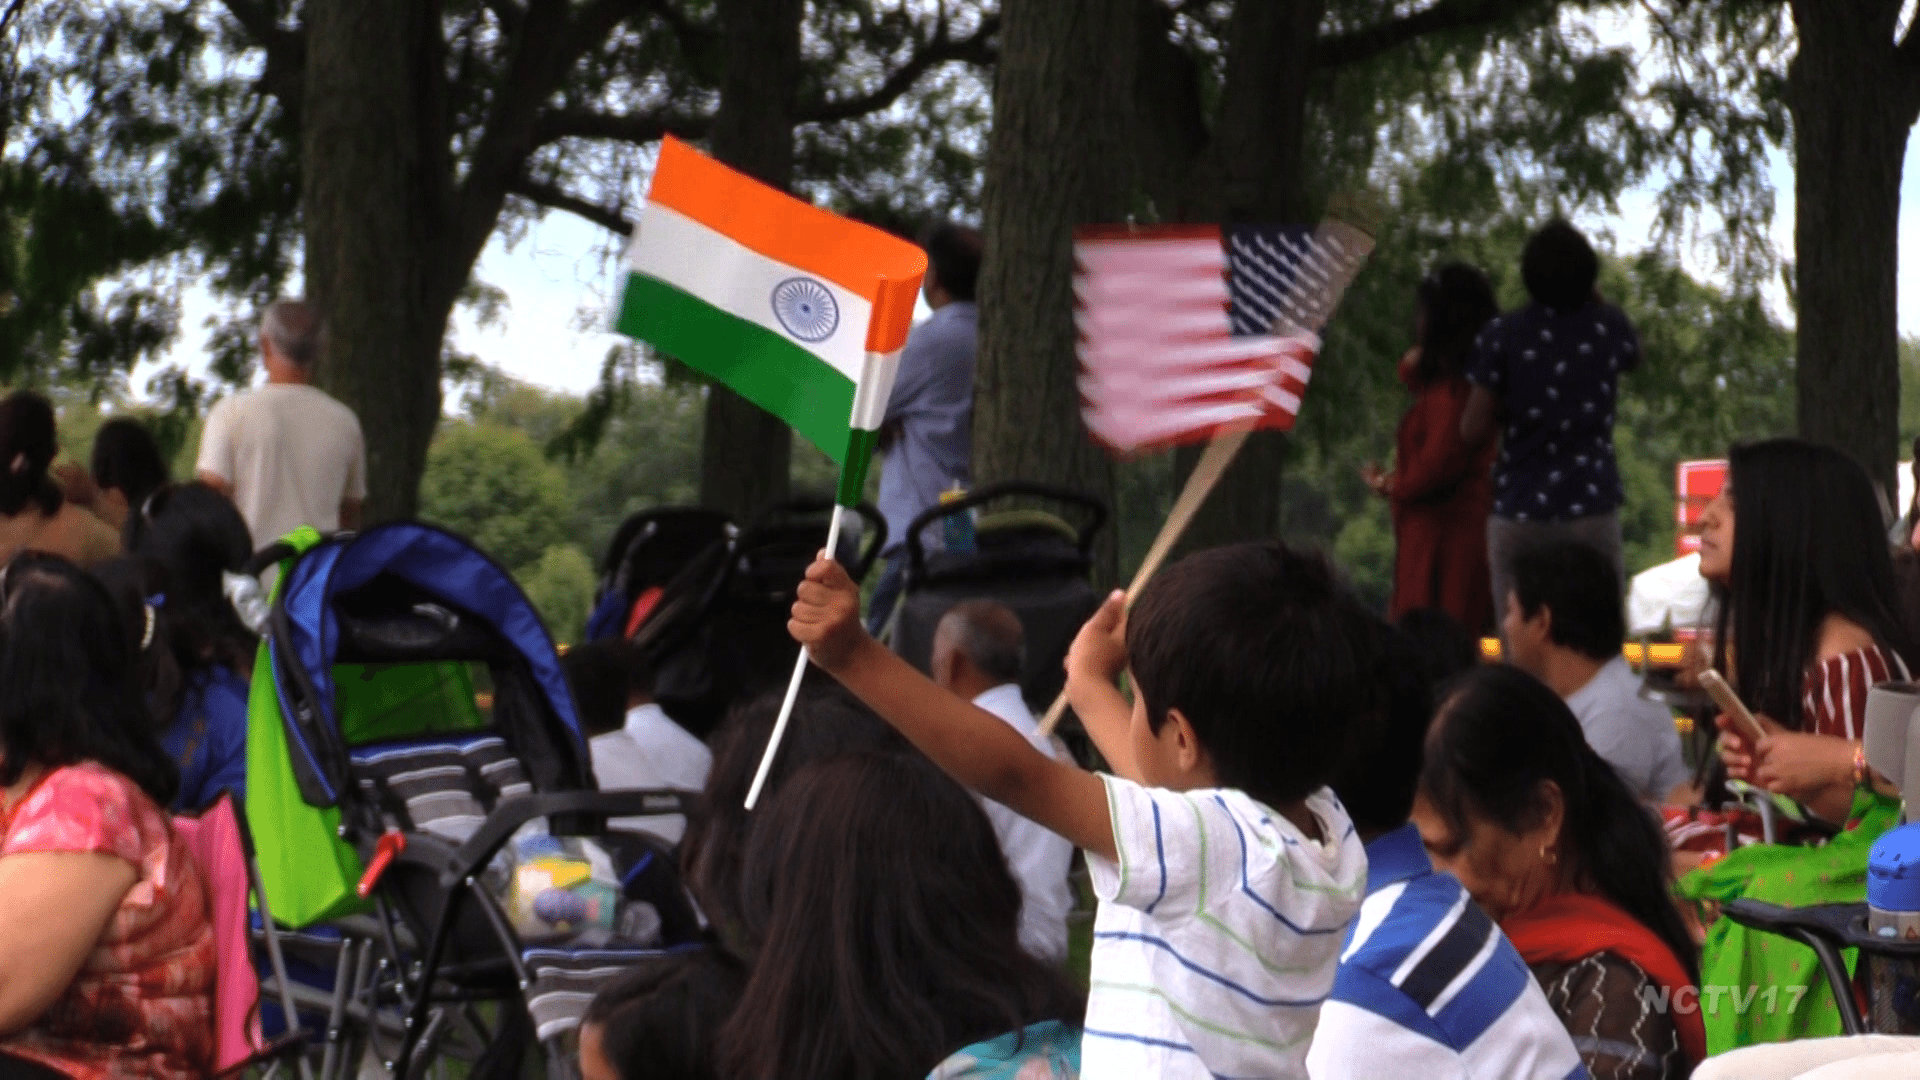 India Day in Naperville NCTV17